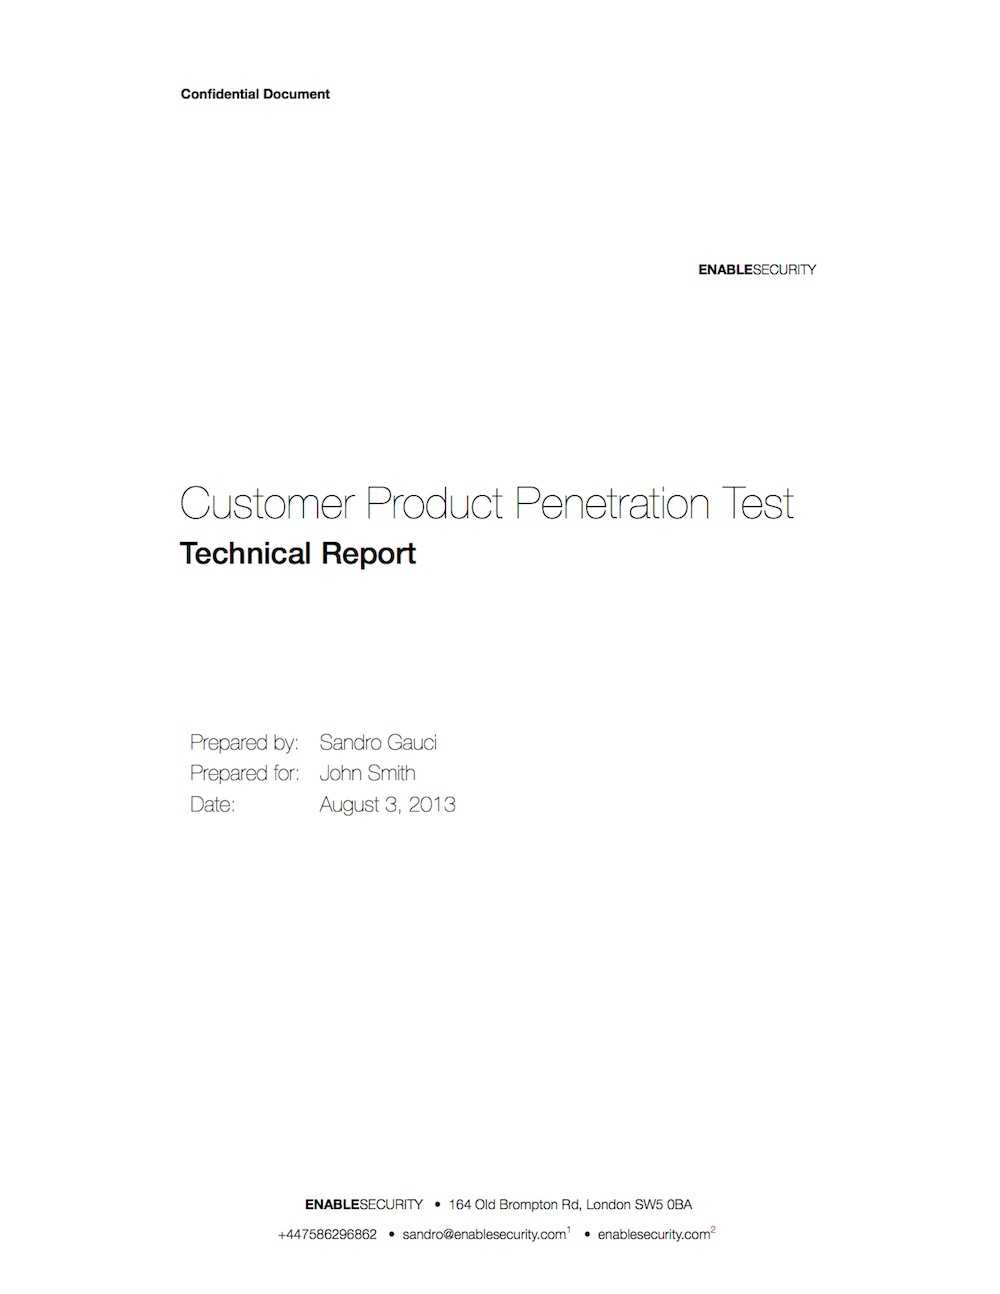 Latex Typesetting – Showcase Throughout Technical Report Cover Page Template